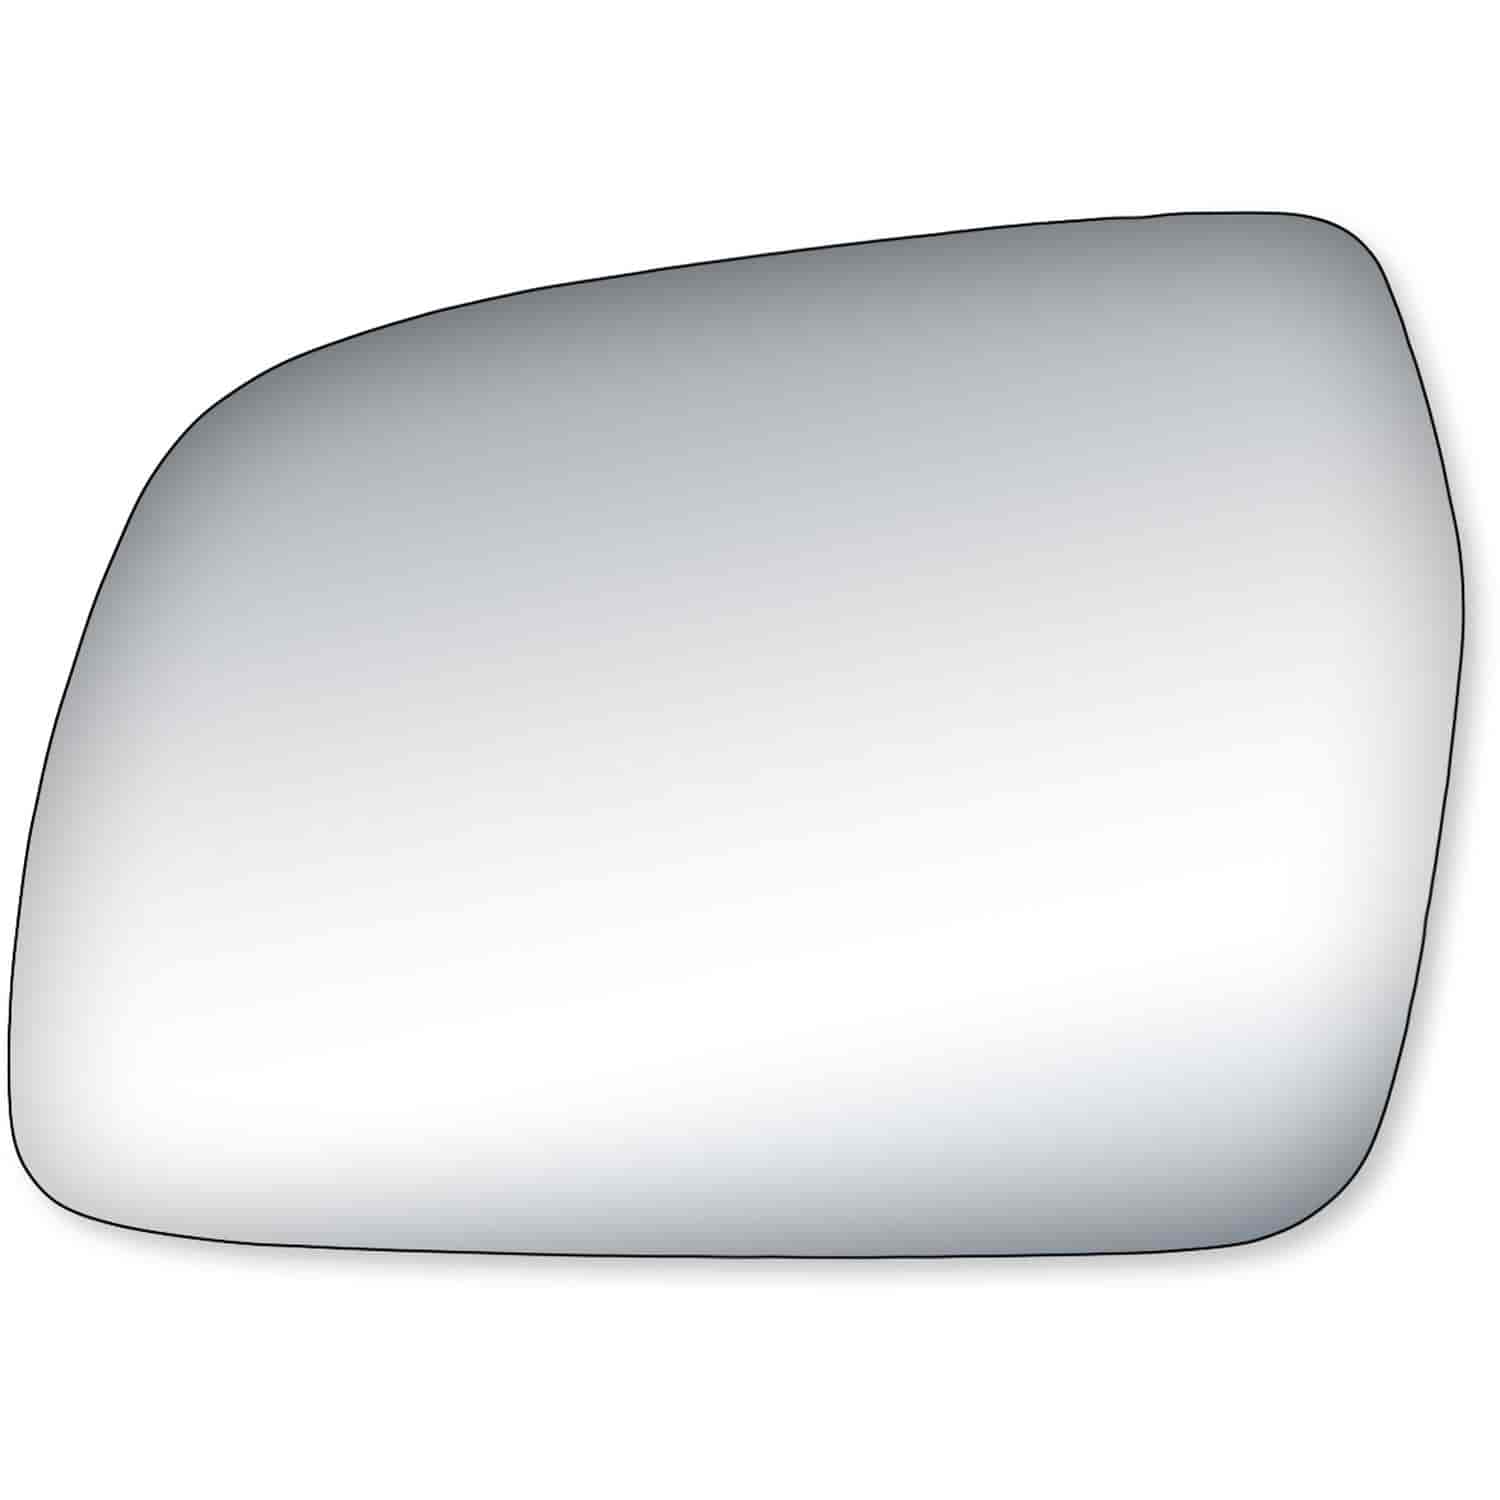 Replacement Glass for 89-98 Sidekick 2 door the glass measures 4 15/16 tall by 6 15/16 wide and 7 7/